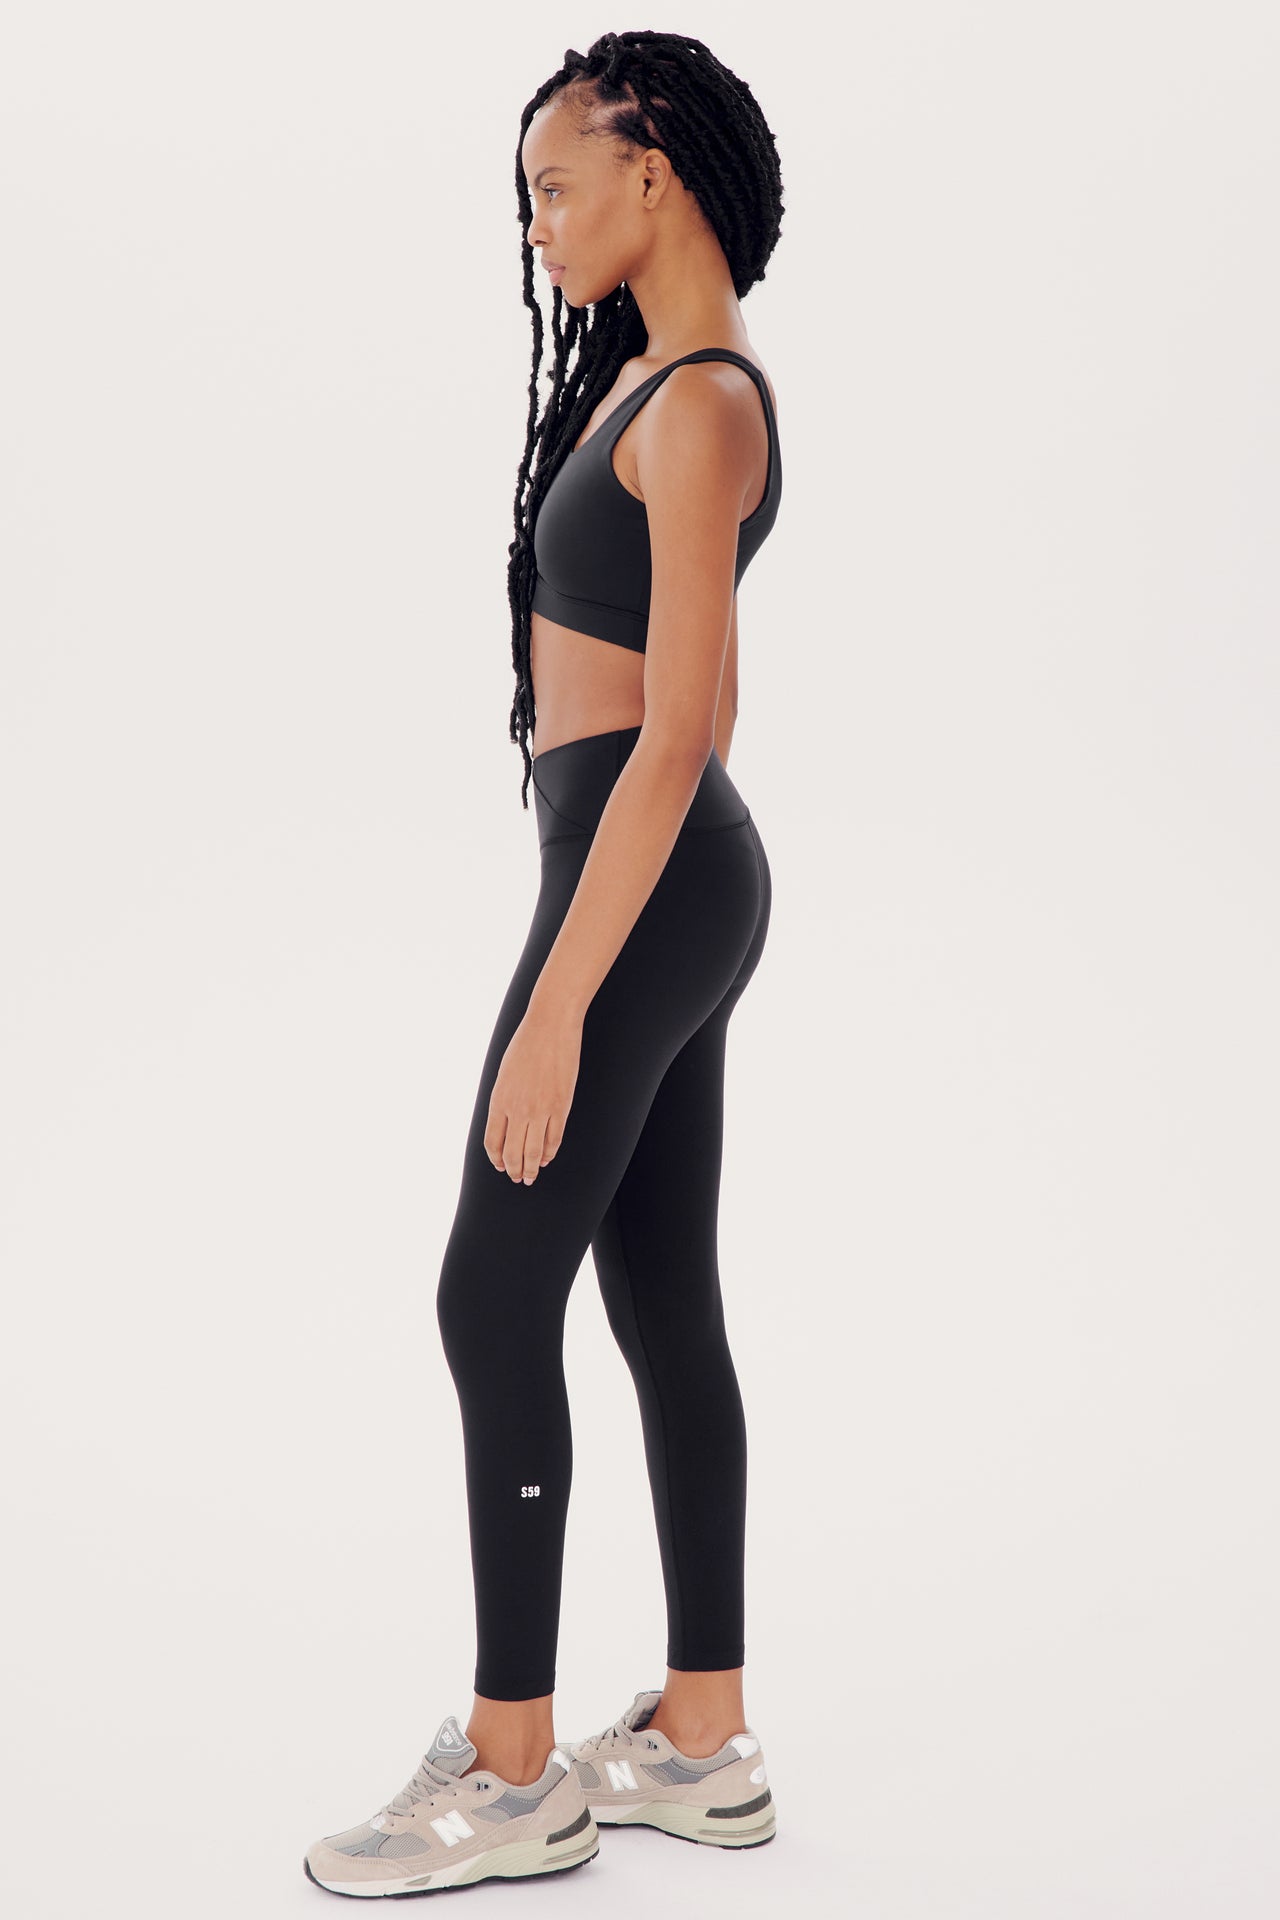 A woman in Mia Rigor 7/8 - Black sports bra and high waist leggings stands in profile, showcasing SPLITS59 activewear, with her hair in braids.